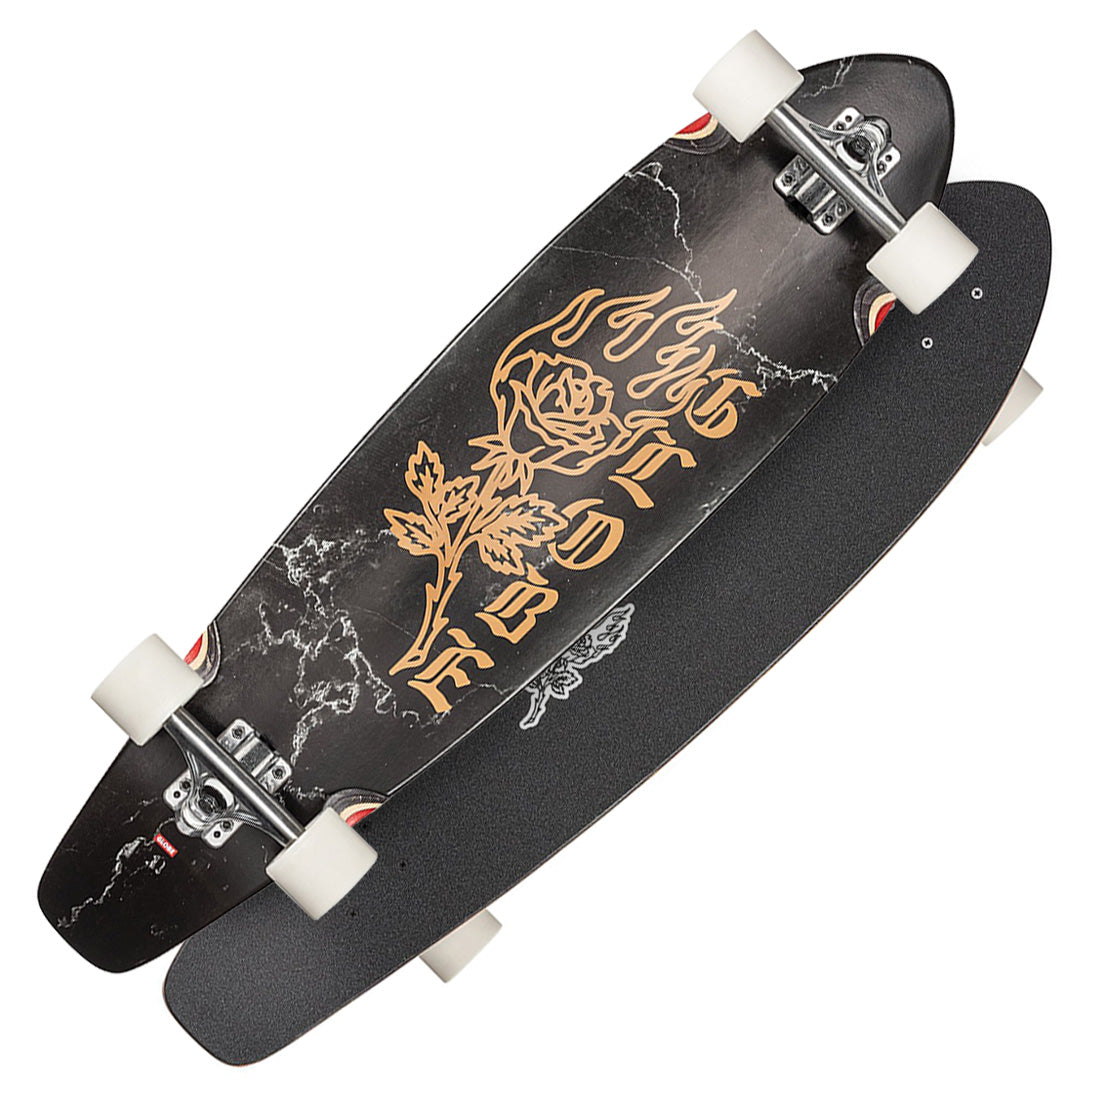 Globe The All-Time 35 Complete - Black Rose Skateboard Completes Longboards